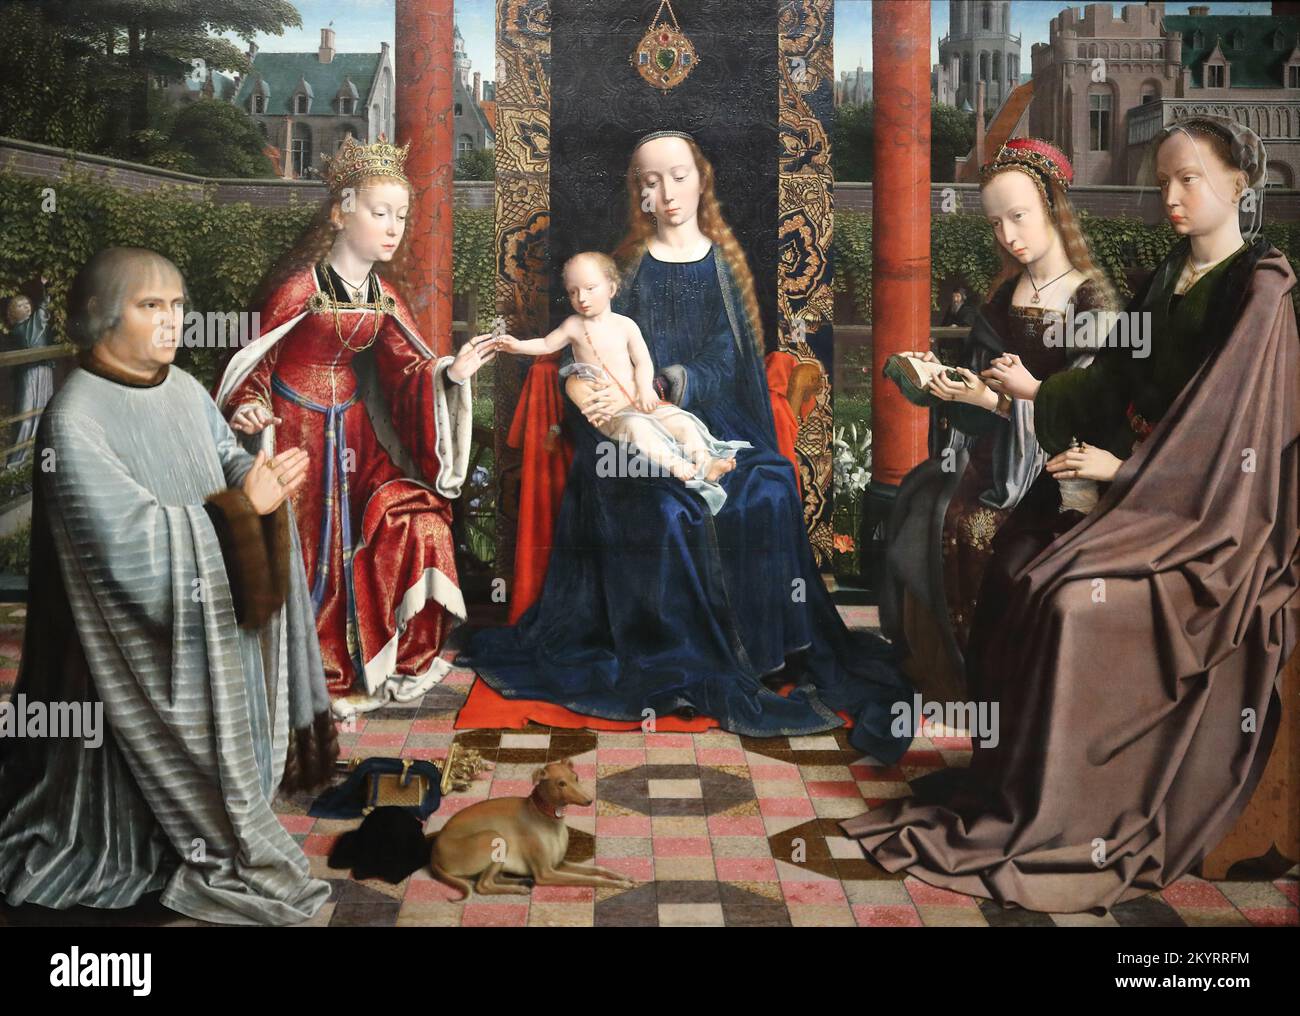 The Virgin and Child with Saints and Donor by Netherlandish painter Gerard David at the National Gallery, London, UK Stock Photo